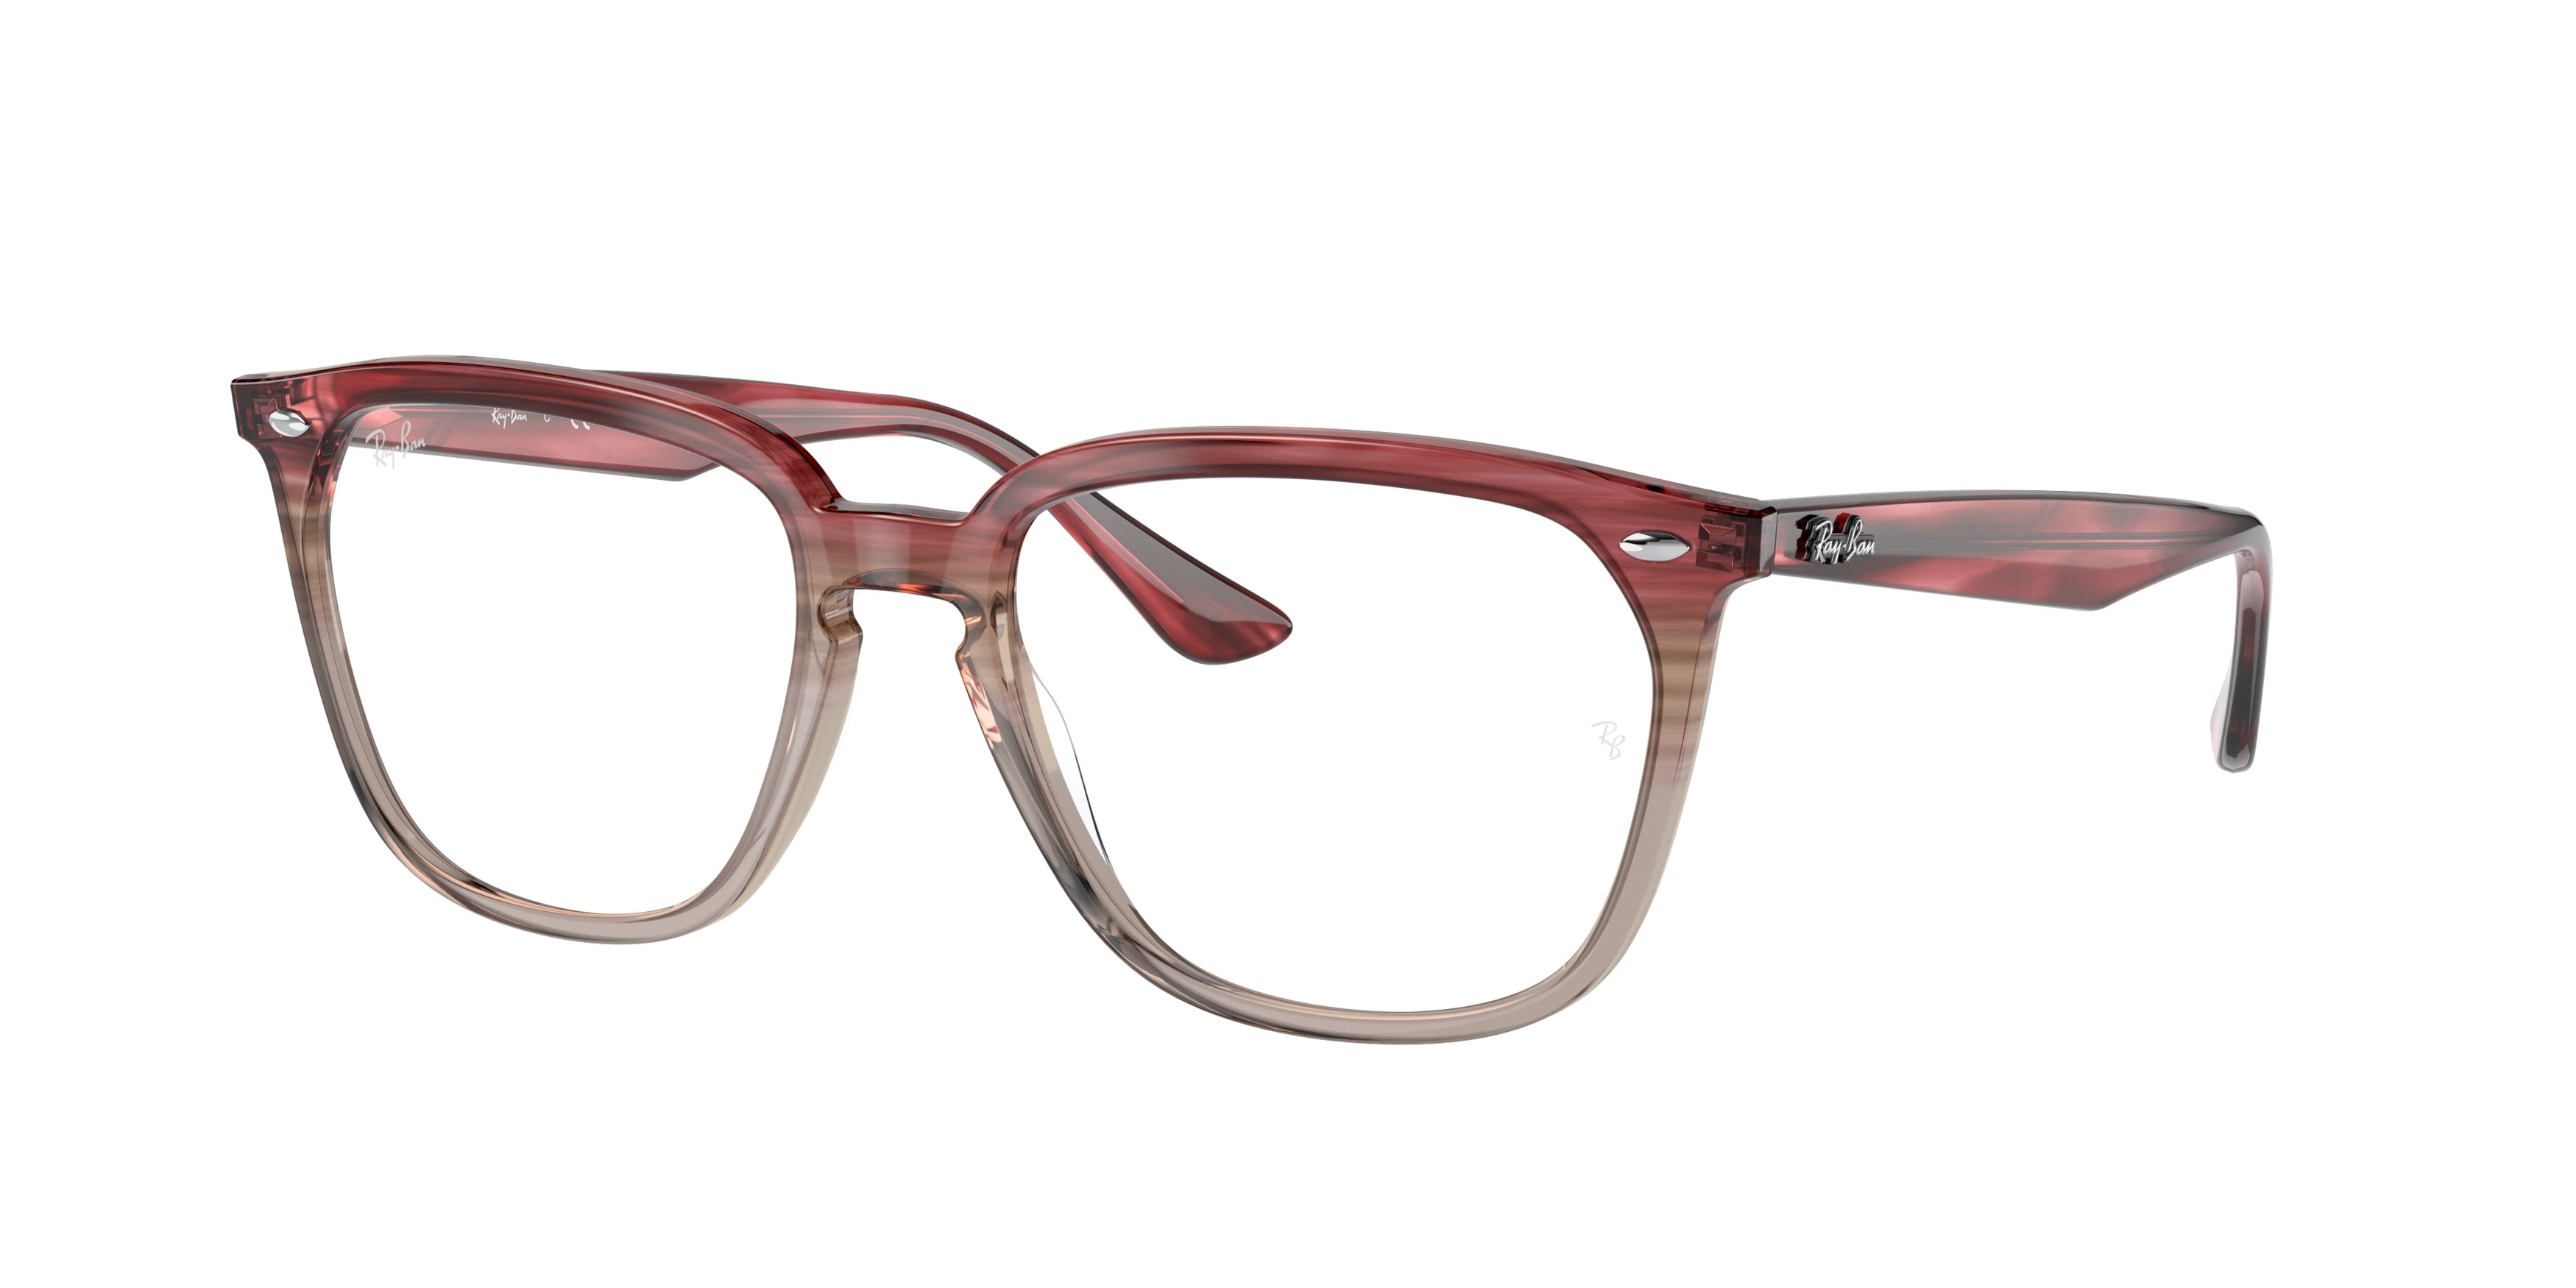 Ray-Ban Optical RX4362V Square Eyeglasses  8145-Bordeaux 51-145-18 - Color Map Red